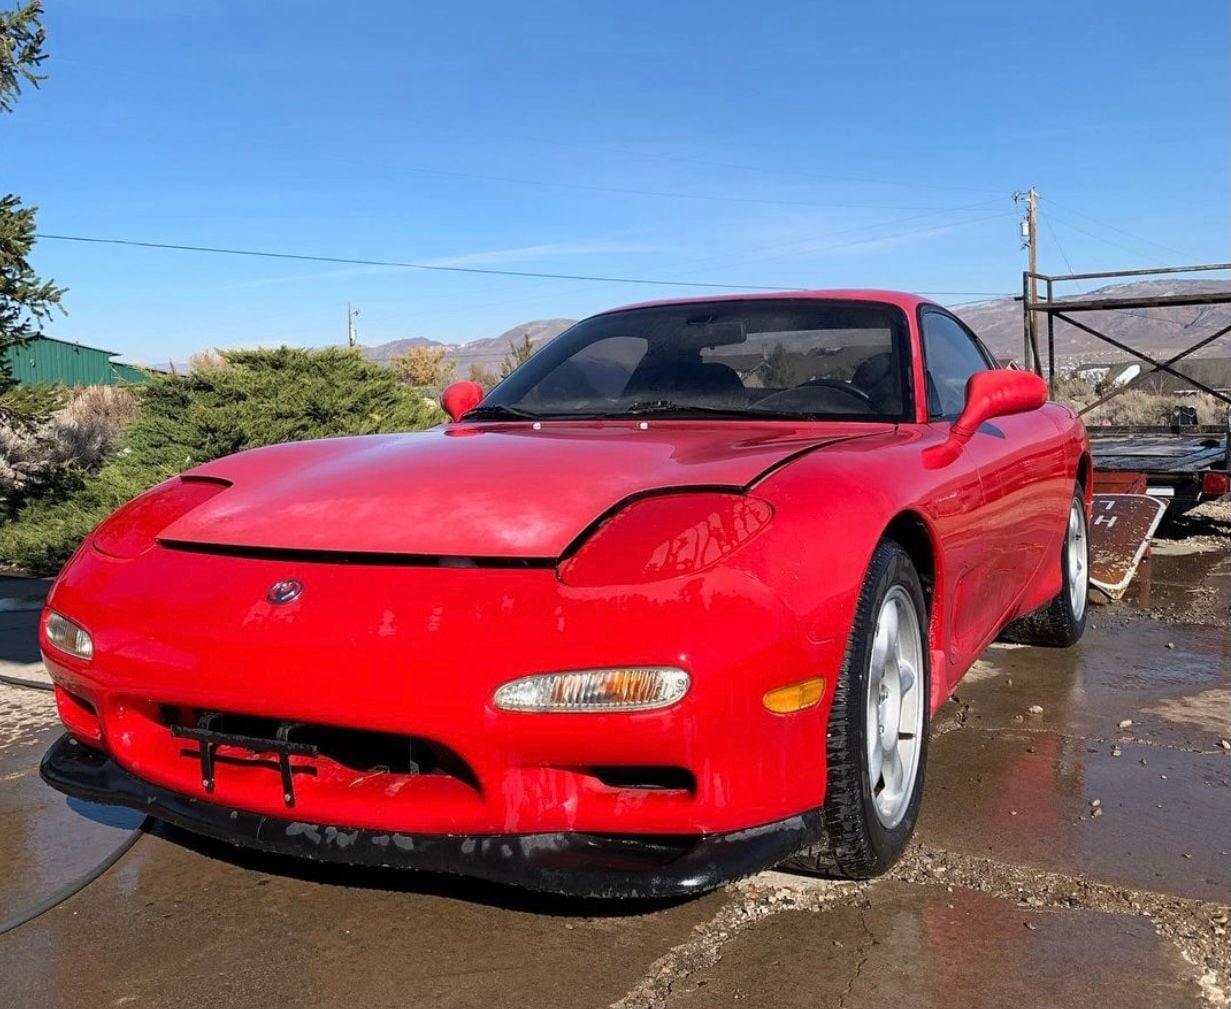 Exterior Body Parts - FD RX7 headlight cover and bezel - Used - 1993 to 1999 Mazda RX-7 - Sparks, NV 89521, United States